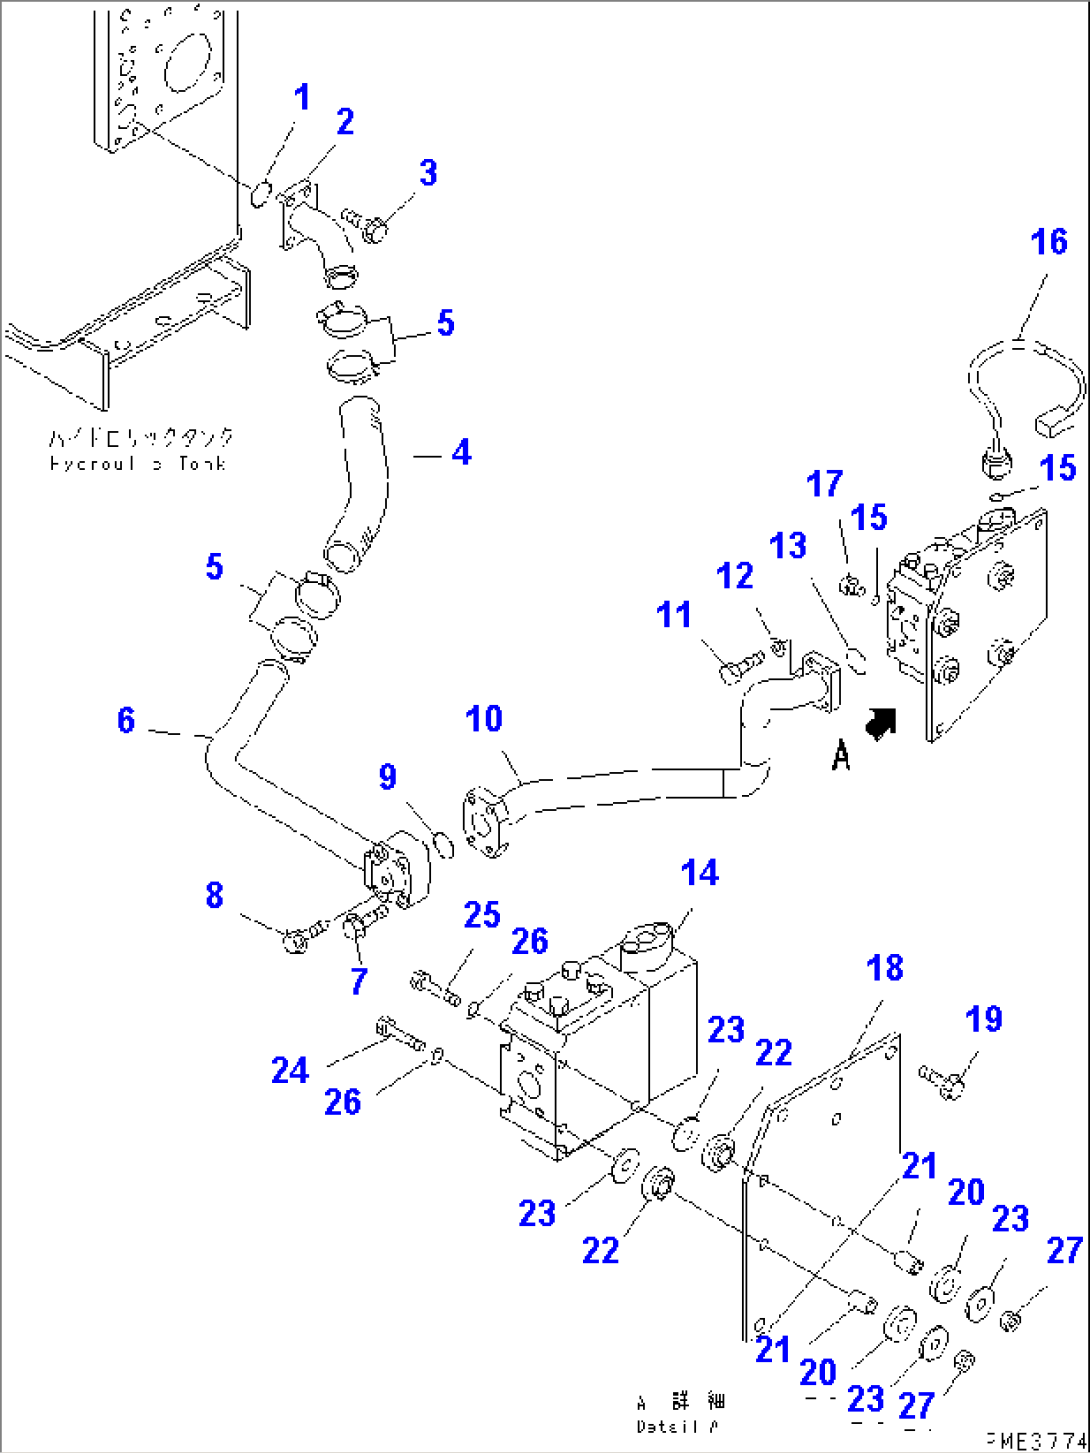 STEERING HYDRAULIC LINE (TANK TO DIVERTER VALVE LINE) (WITH EMERGENCY STEERING)